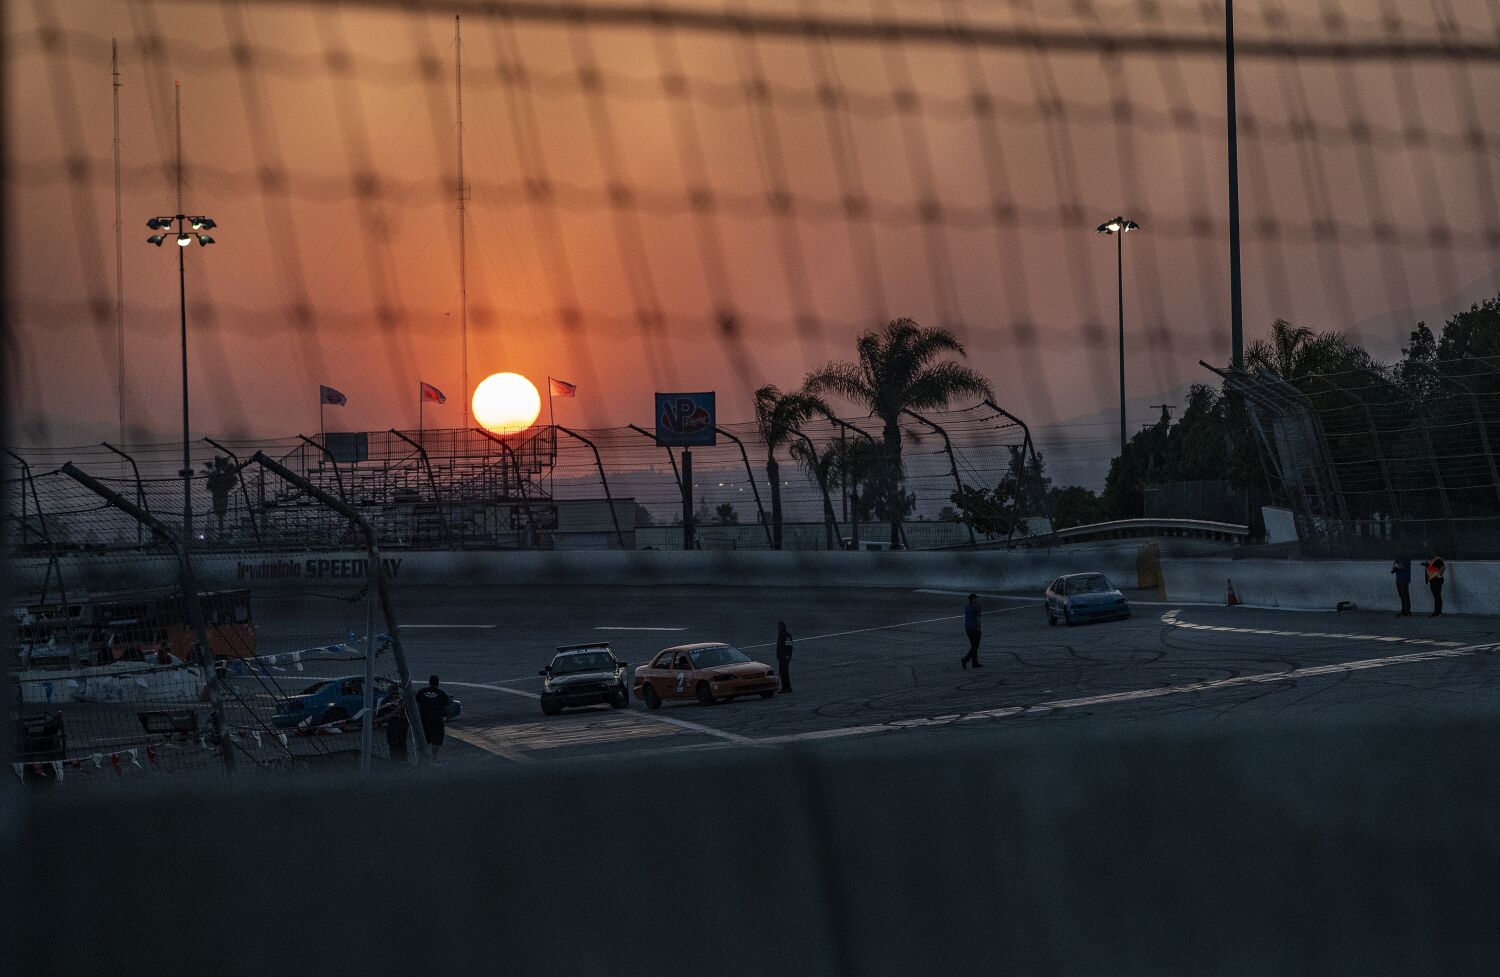 Irwindale Speedway sold; new owner plans demolition and industrial project, city says